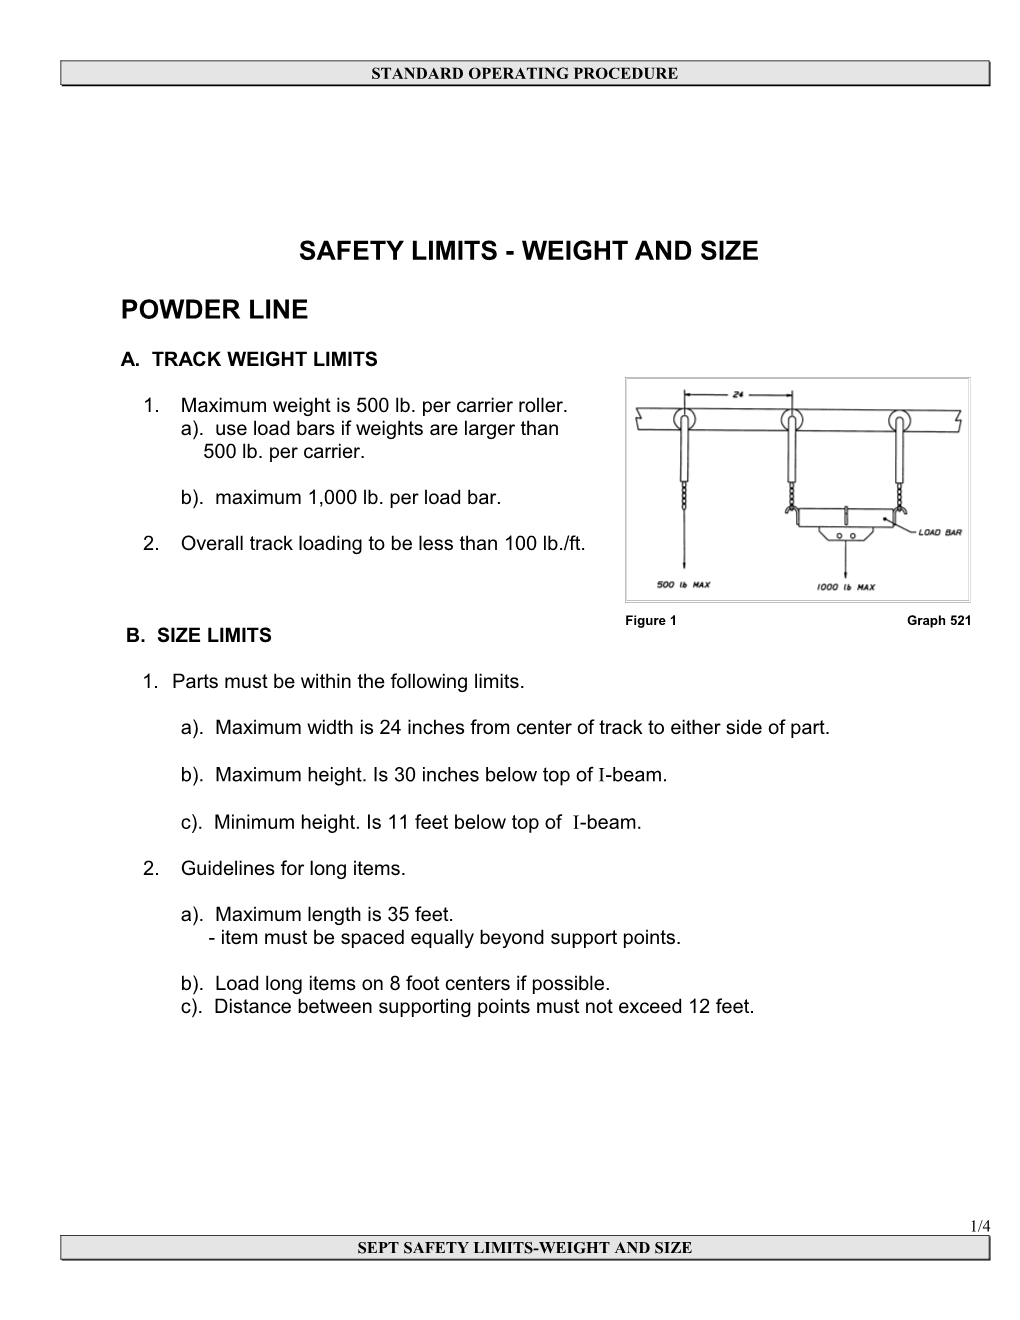 Safety Limits - Weight and Size